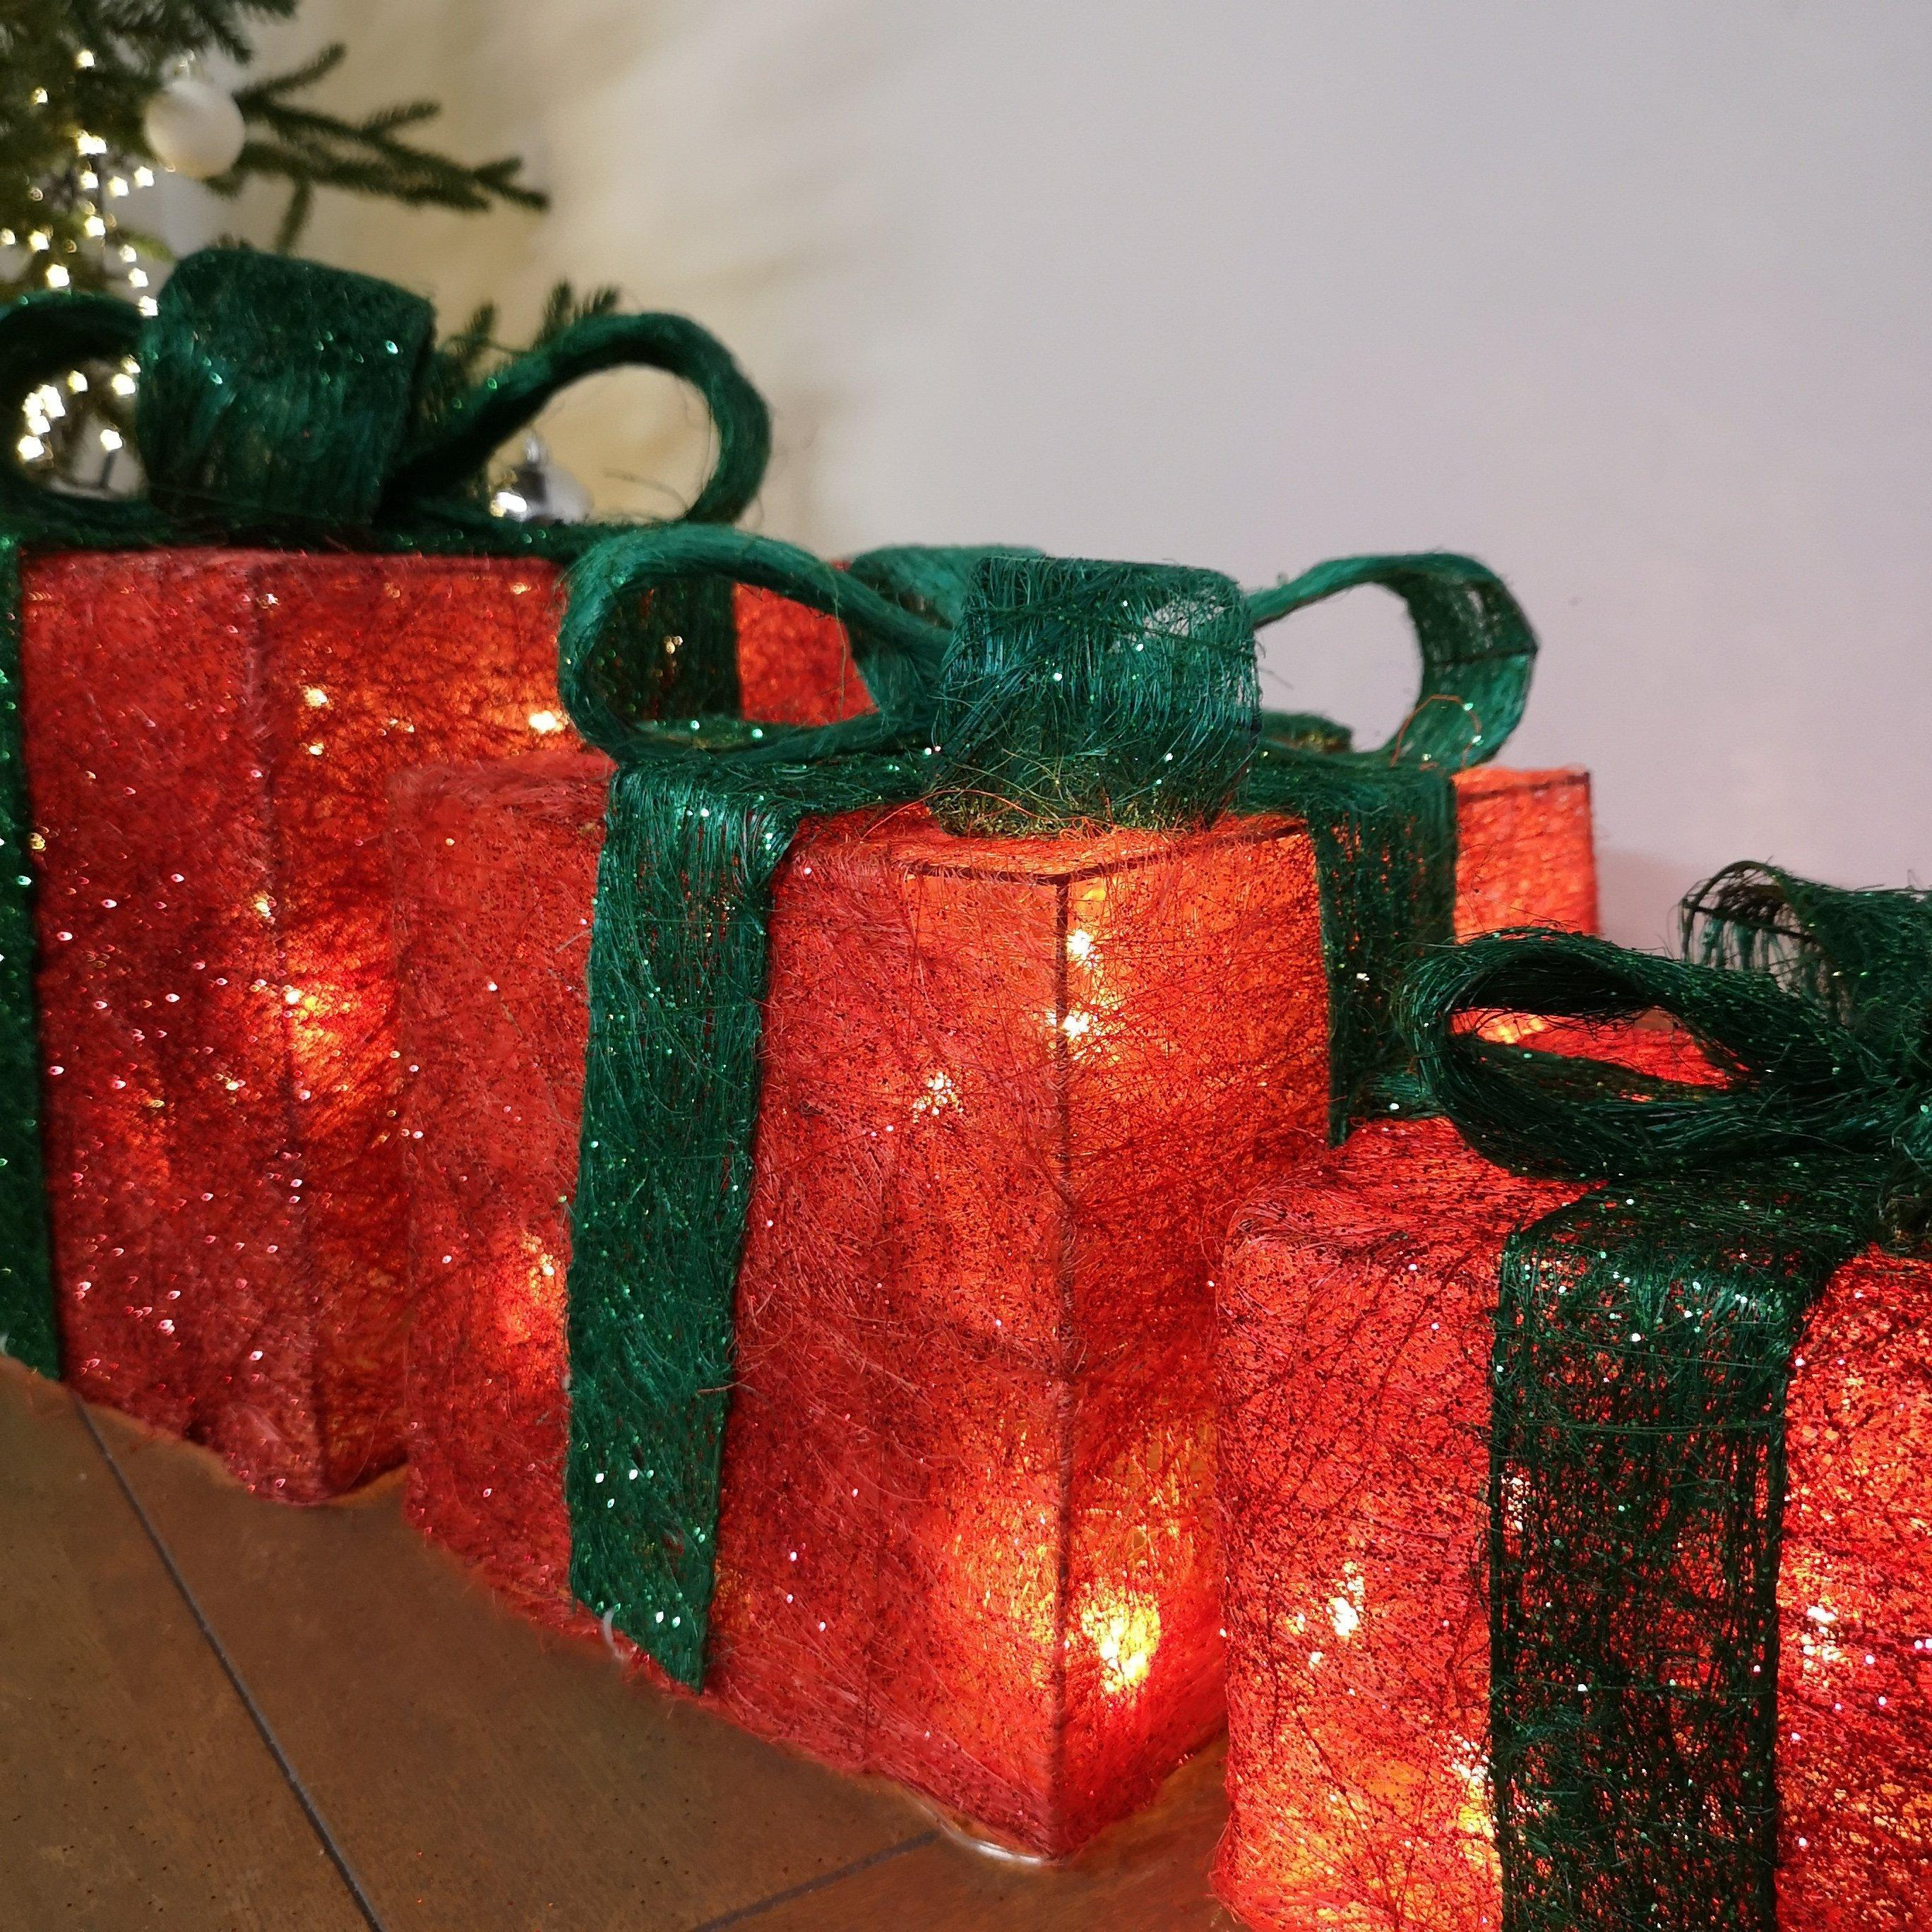 Set of 3 LED Battery Powered Light Up Christmas Present Boxes in Red & Green - image 1